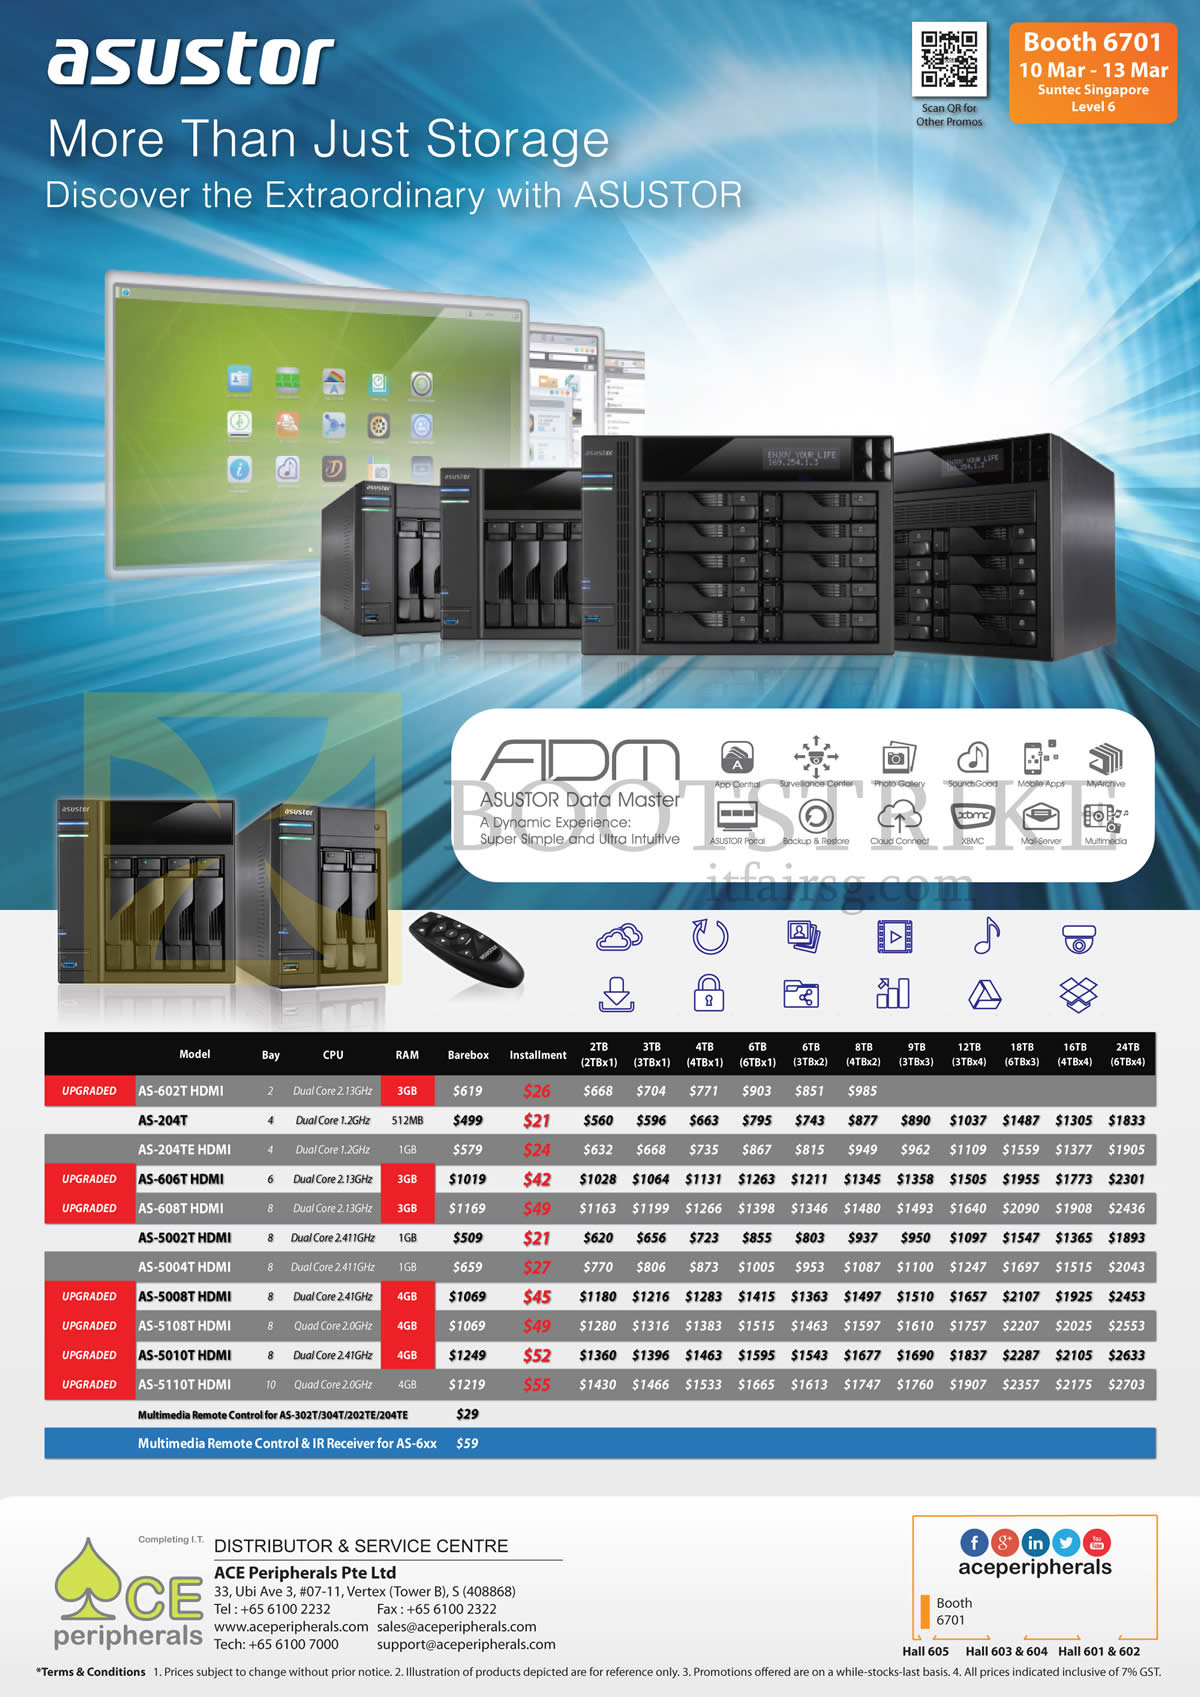 IT SHOW 2016 price list image brochure of Ace Peripherals NAS Asustor AS 202T, 202TE, 204T, 204TE, 302T, 304T, 602T, 604T, 606T, 608T, 7004T, 7008T, 7010T